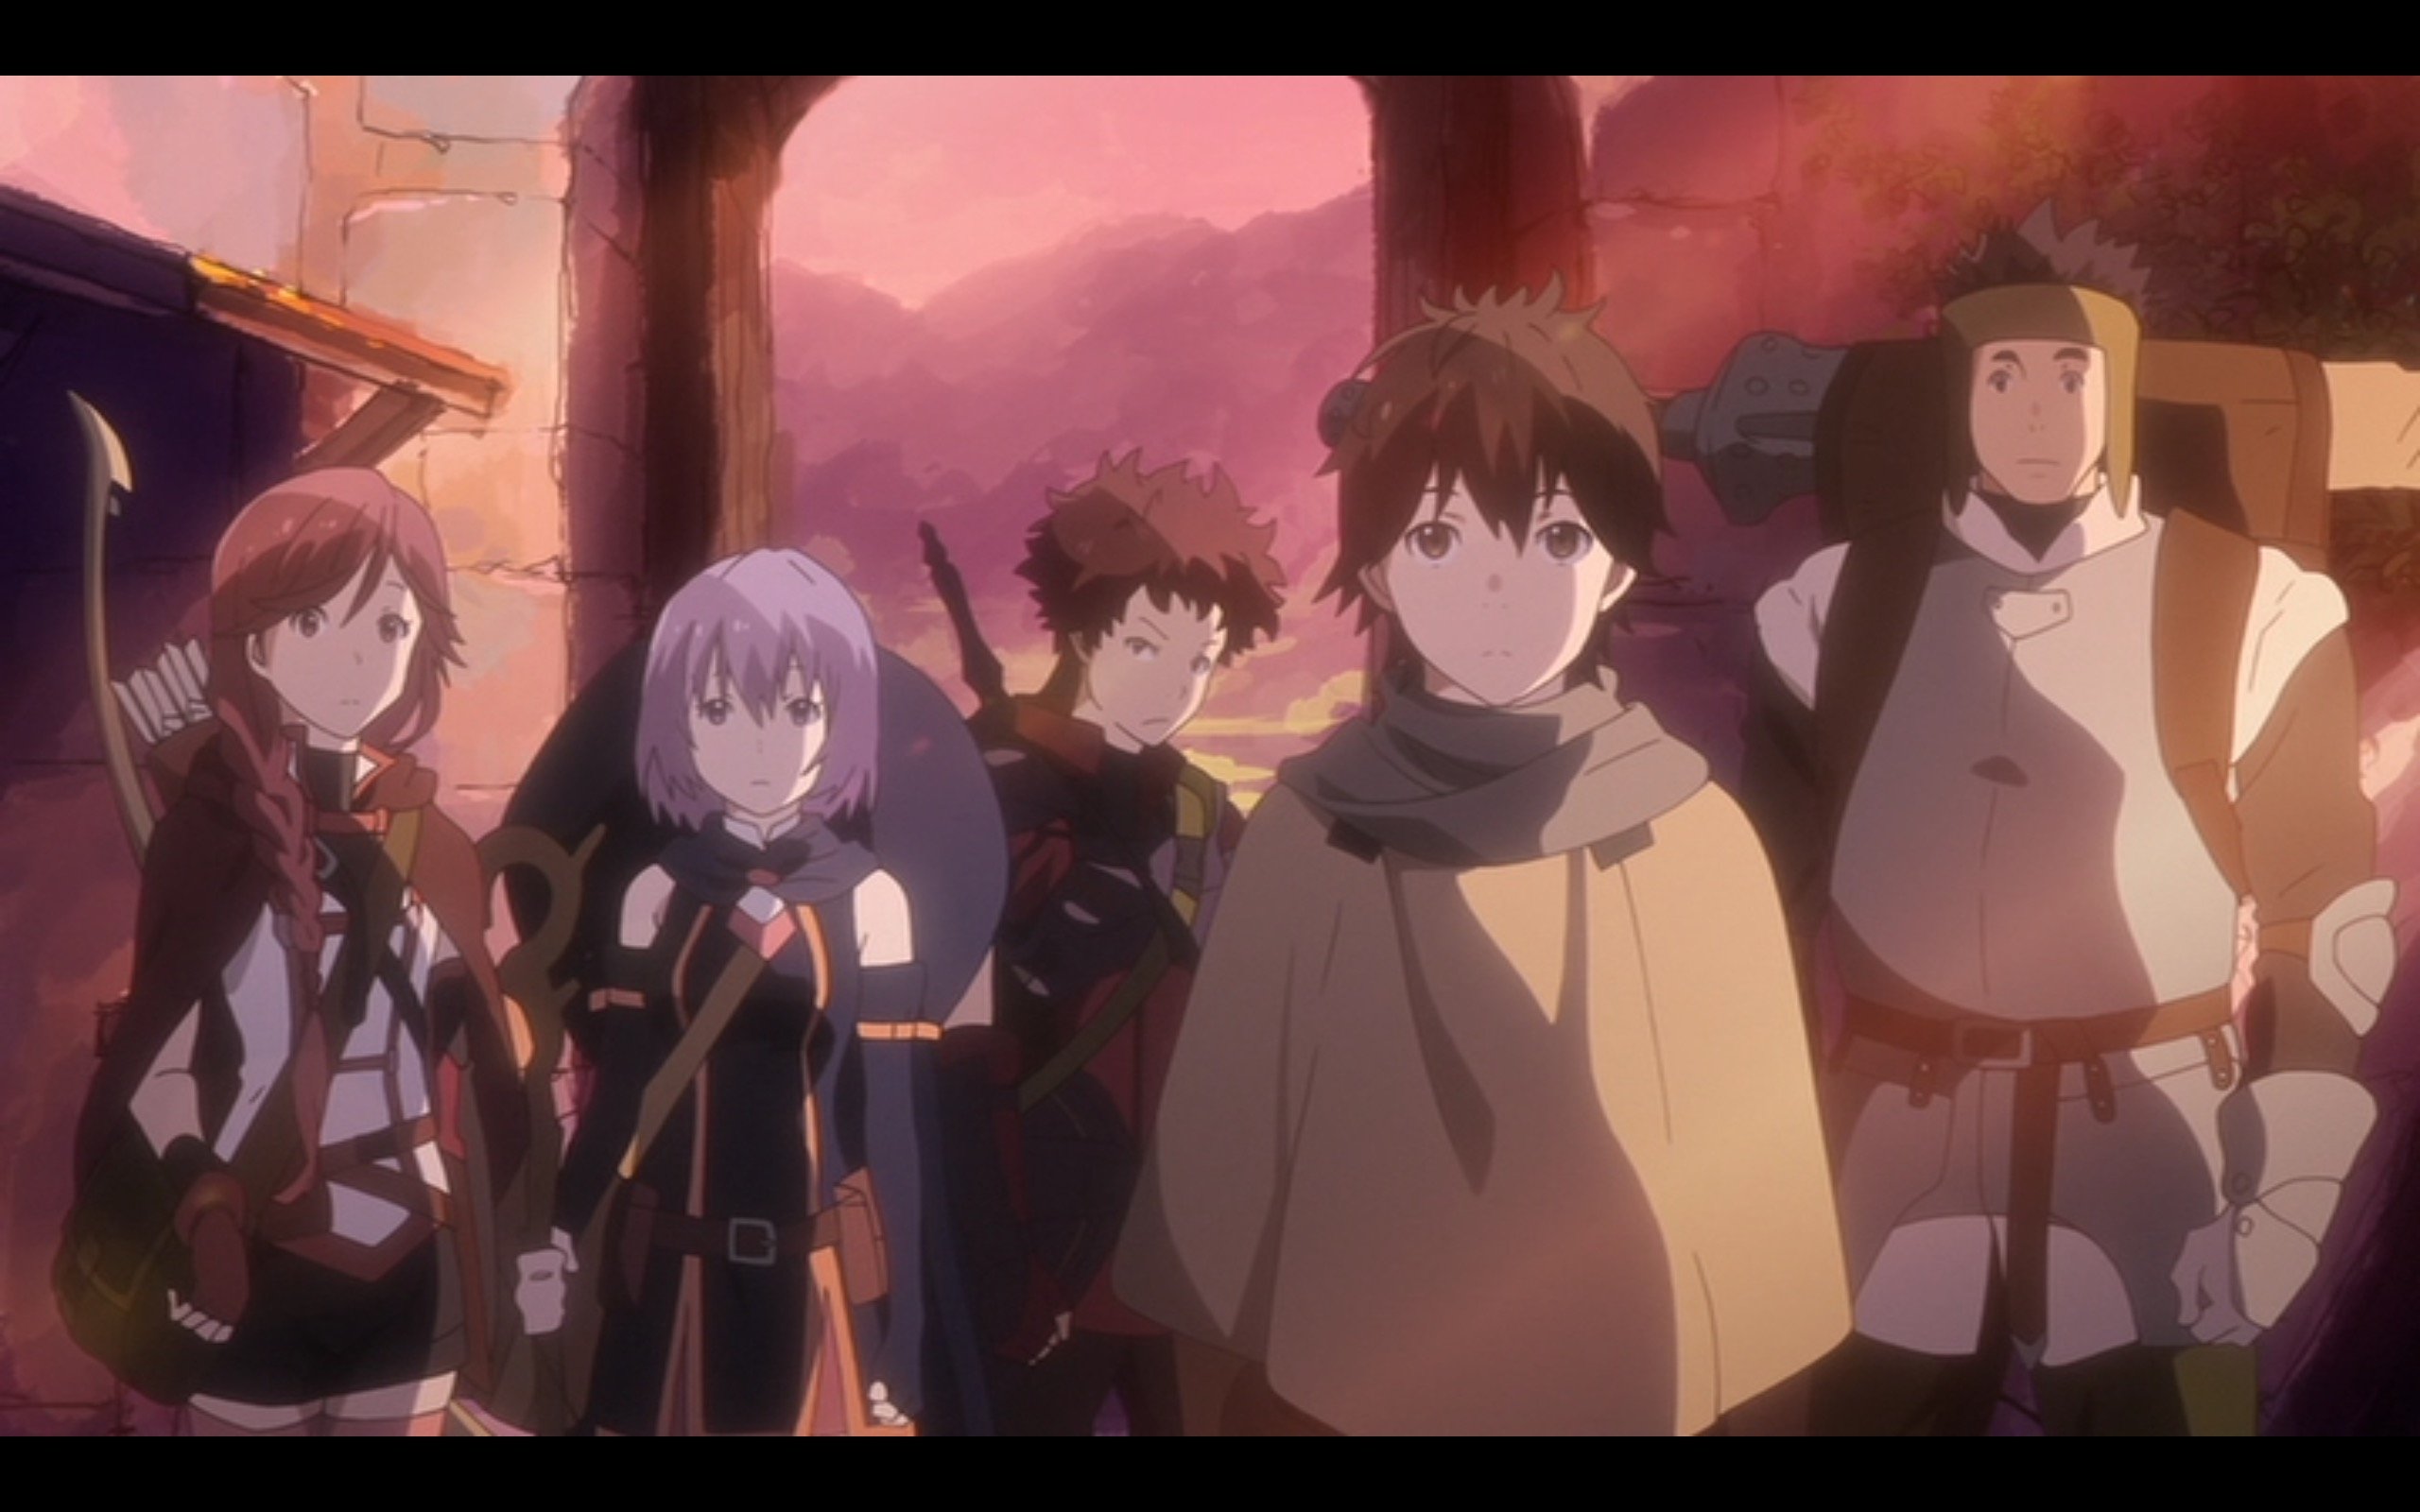 Grimgar, Ashes and Illusions Season 1: Where To Watch Every